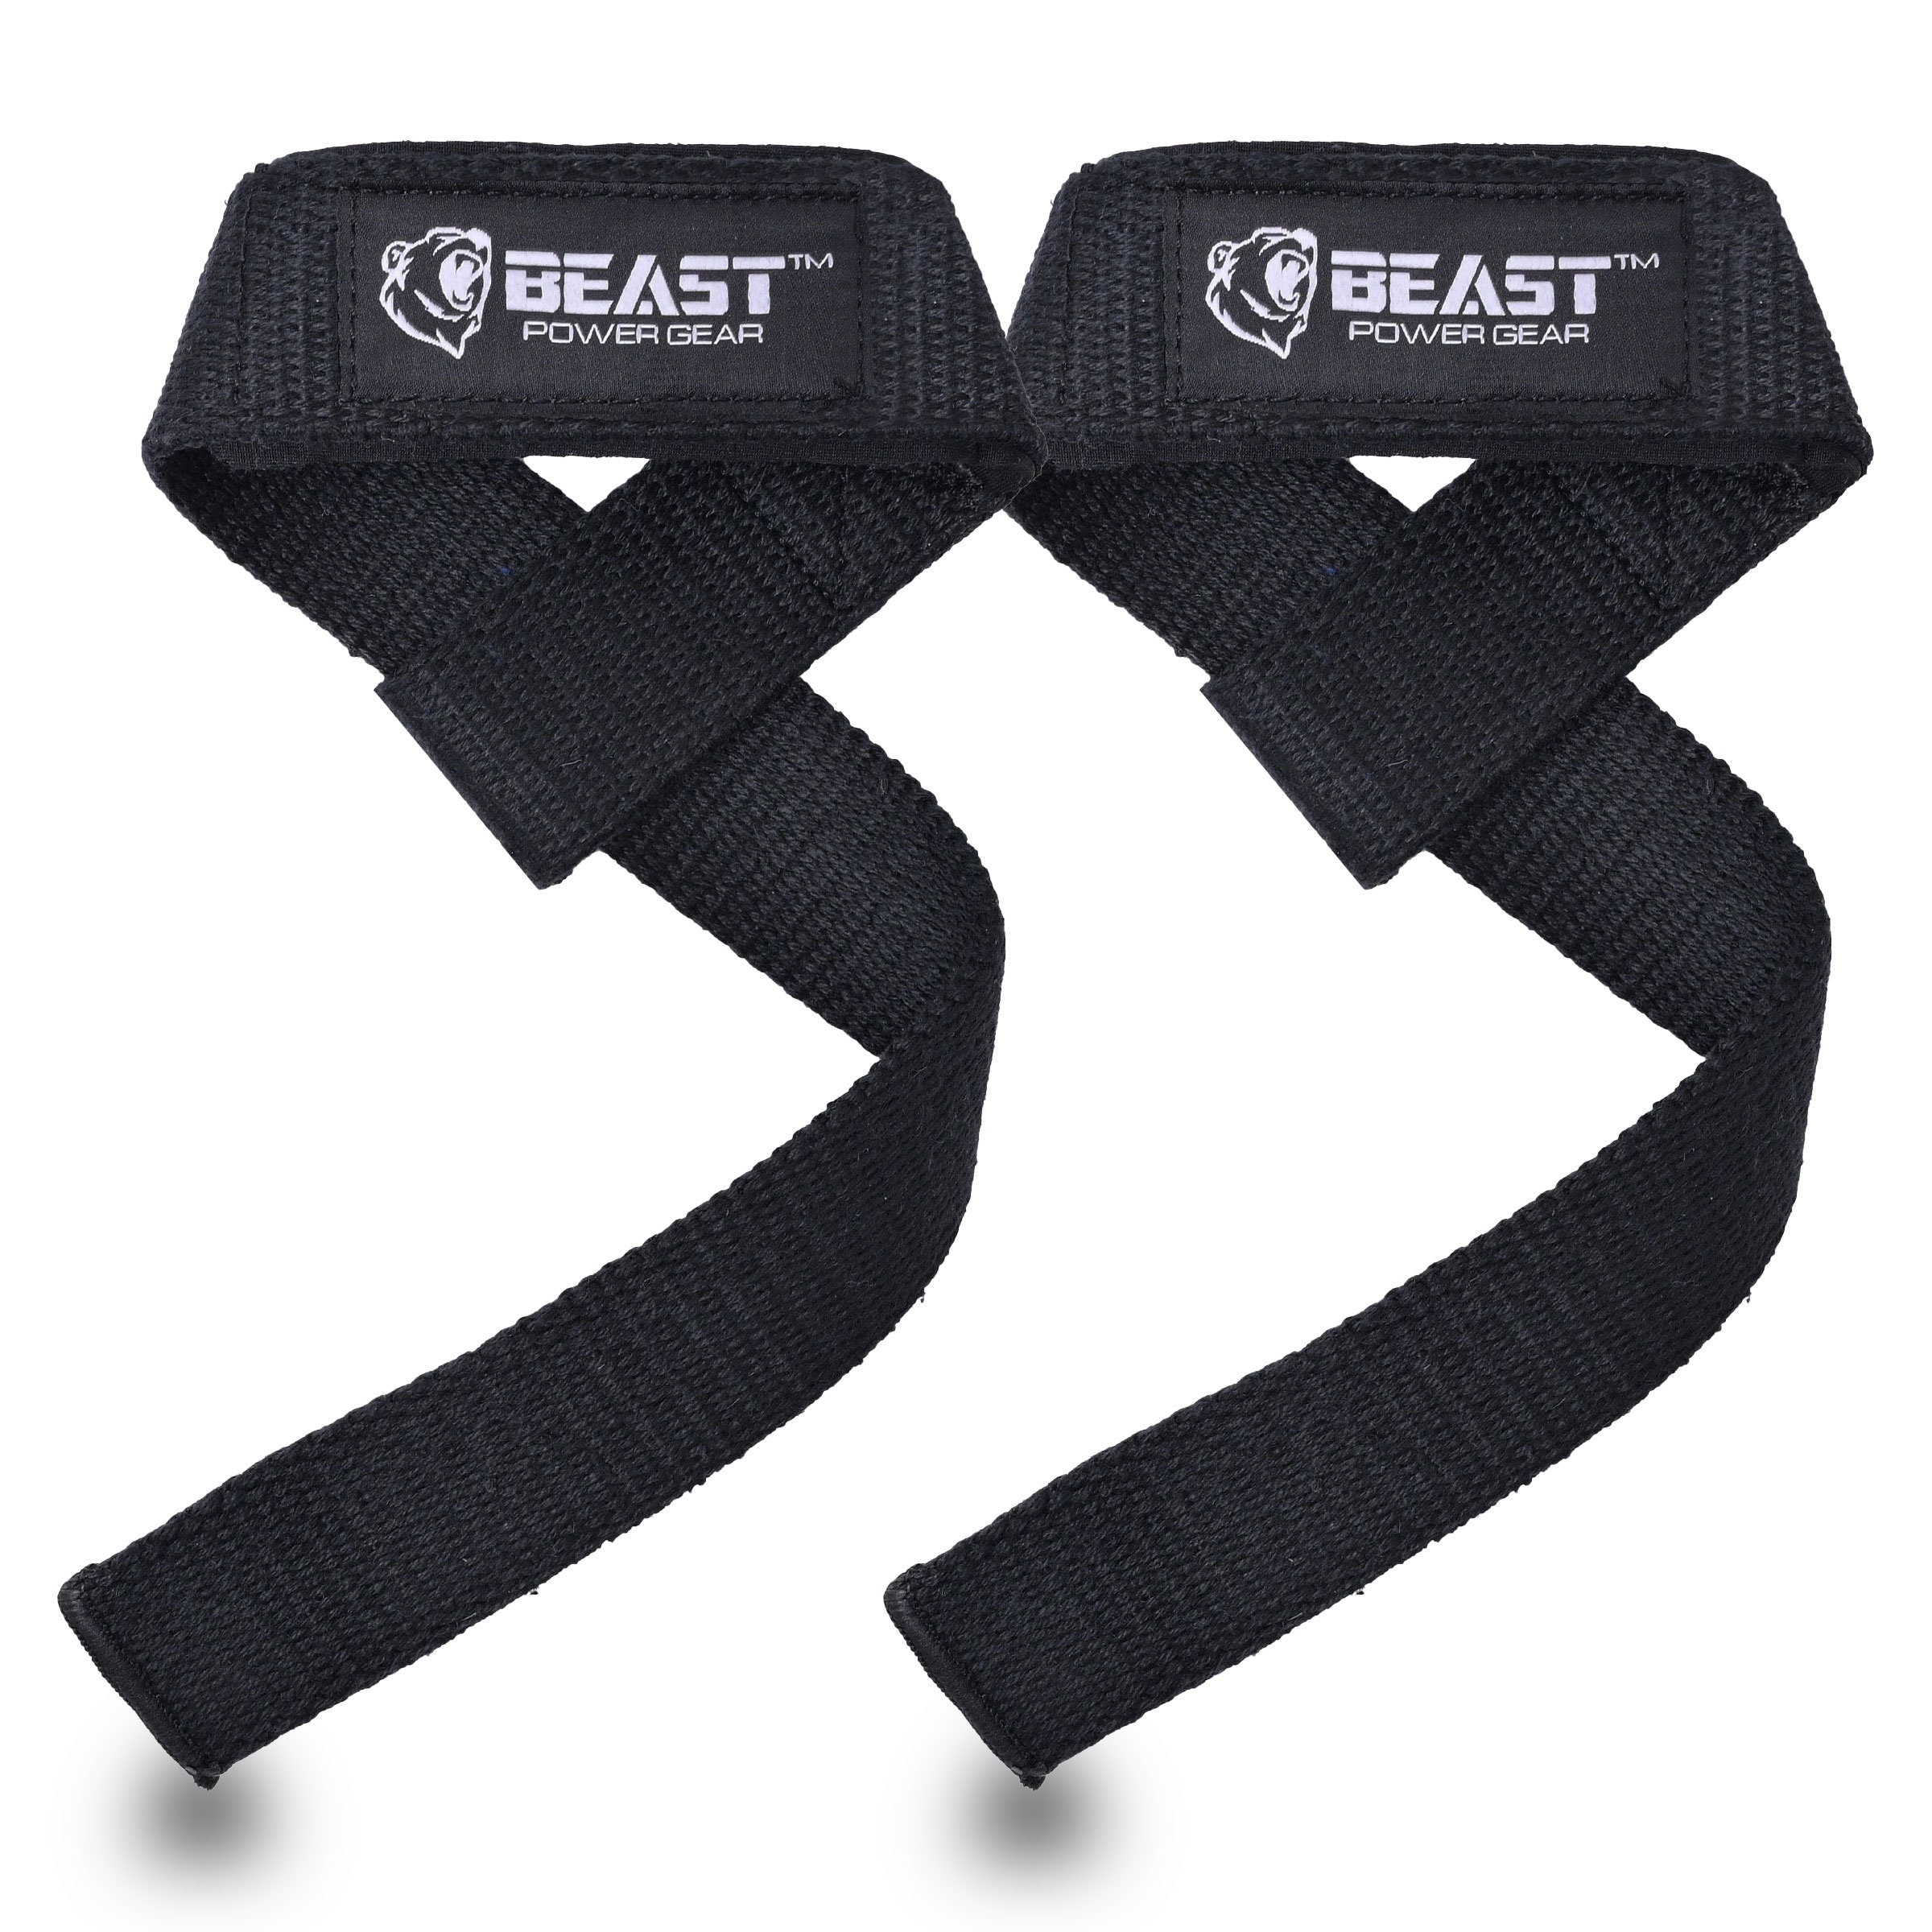 Wrist Straps for Weightlifting - Two-Sided Anti Slip Silicone Grip &  Premium Padded Neoprene - Durable Gym Lifting Straps for Men and Women -  Ideal